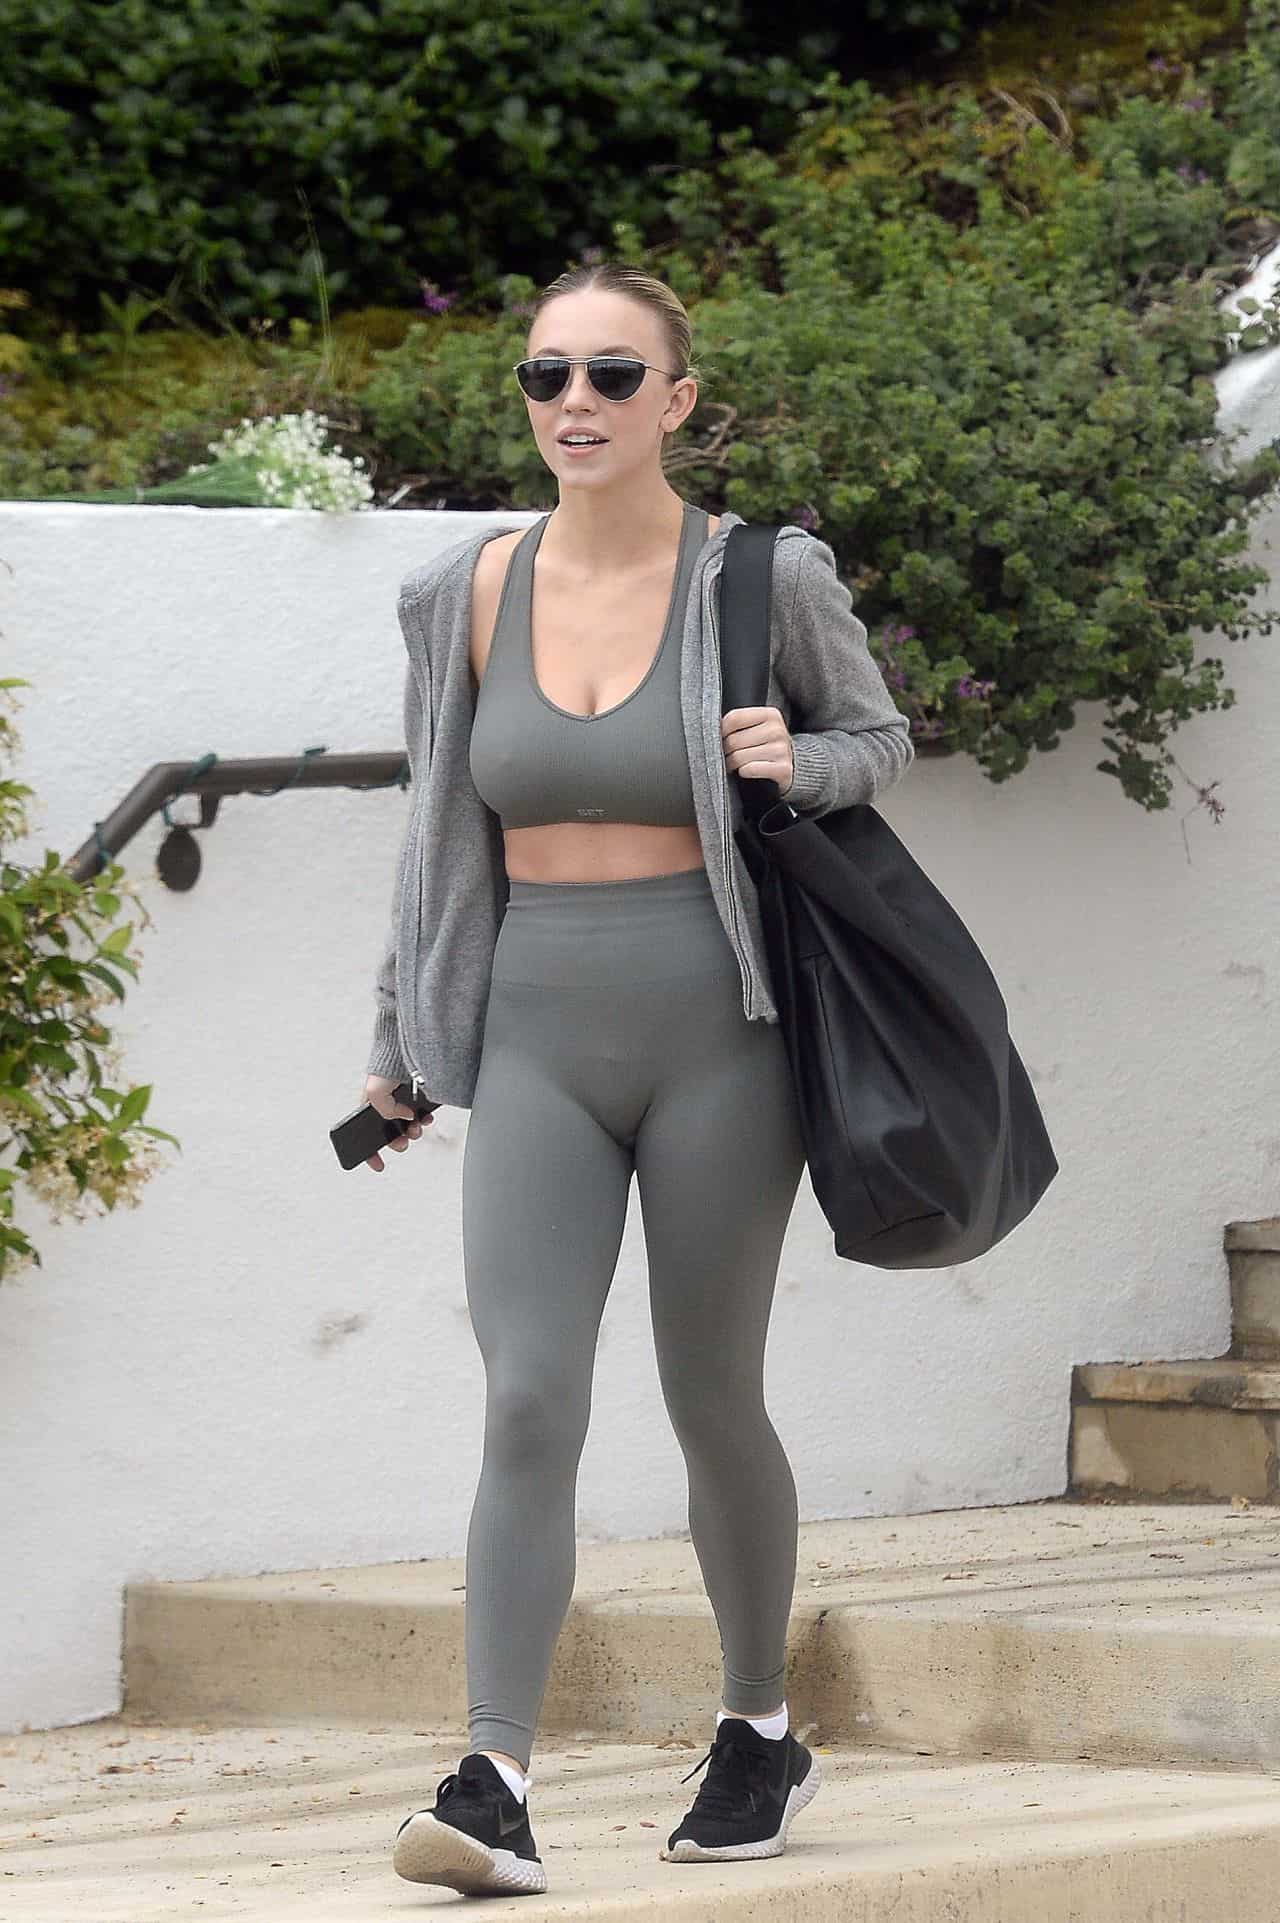 Sydney Sweeney Displays her Athletic Figure while Leaving the Gym in LA